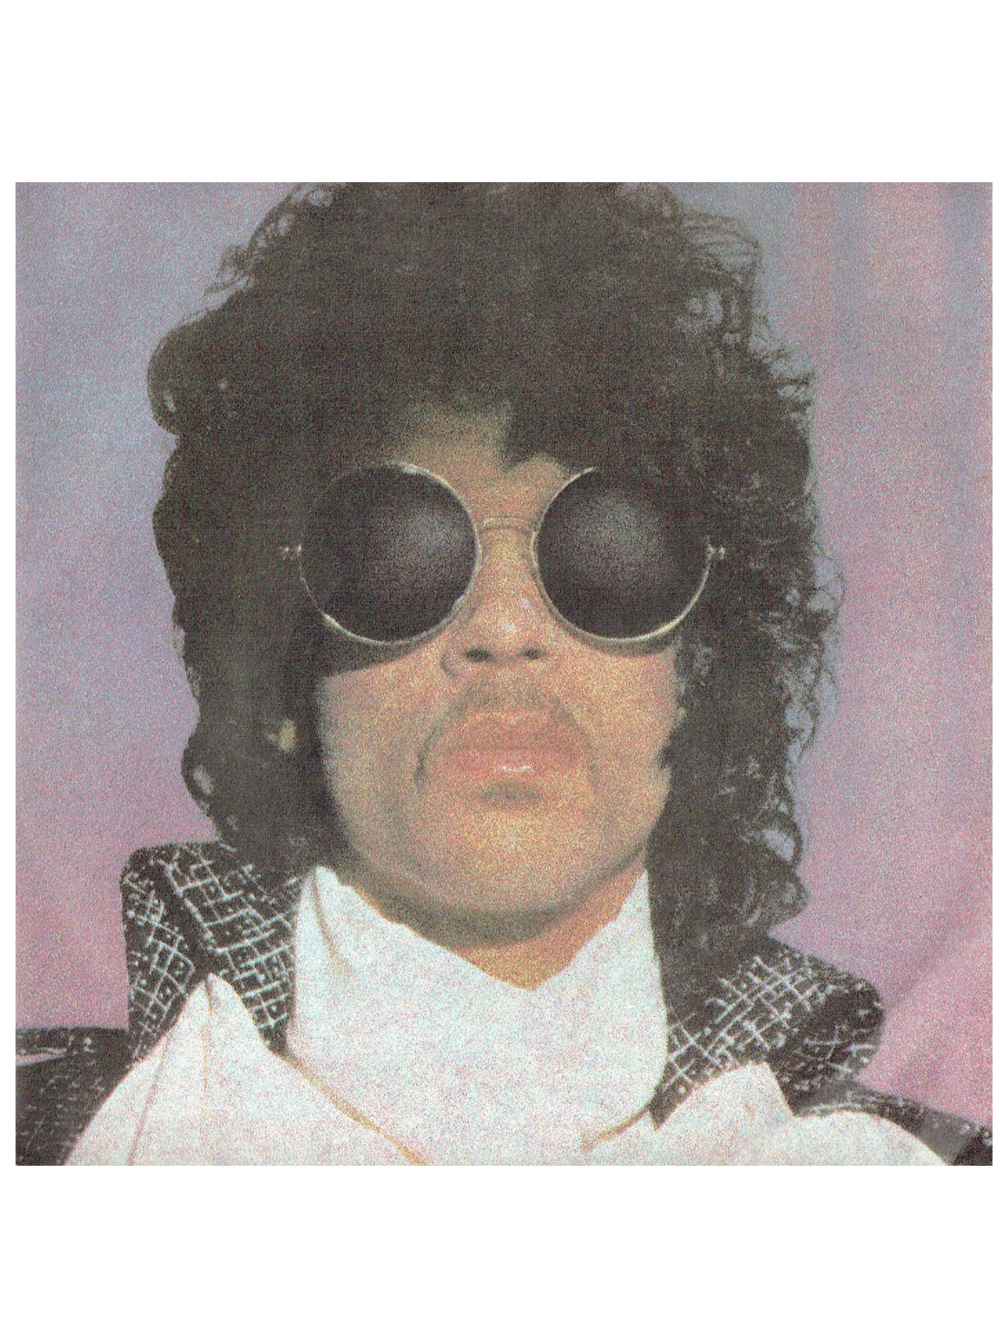 Prince – When Doves Cry / 17 Days 7 Inch UK Release W89286 Near Mint Blue Label